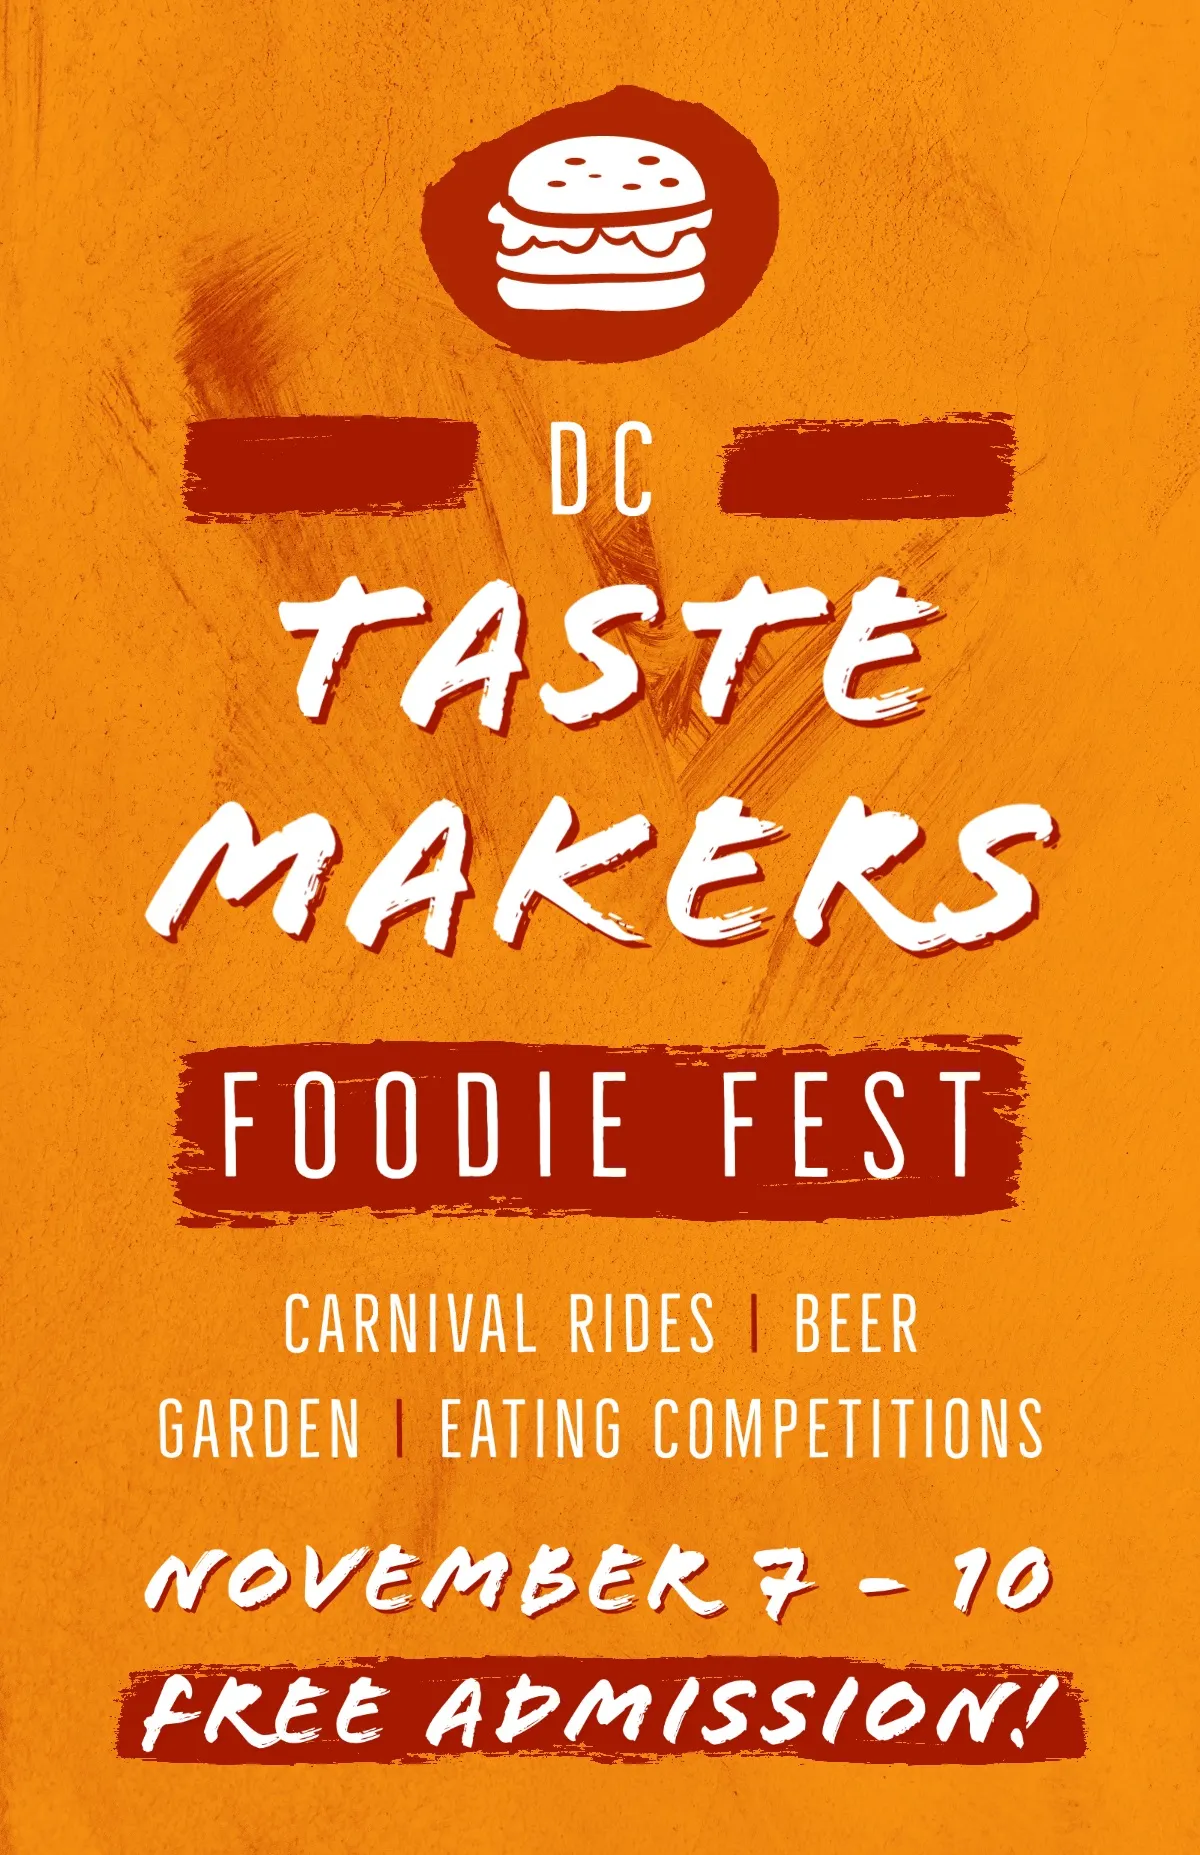 Orange and White Foodie Fest Poster